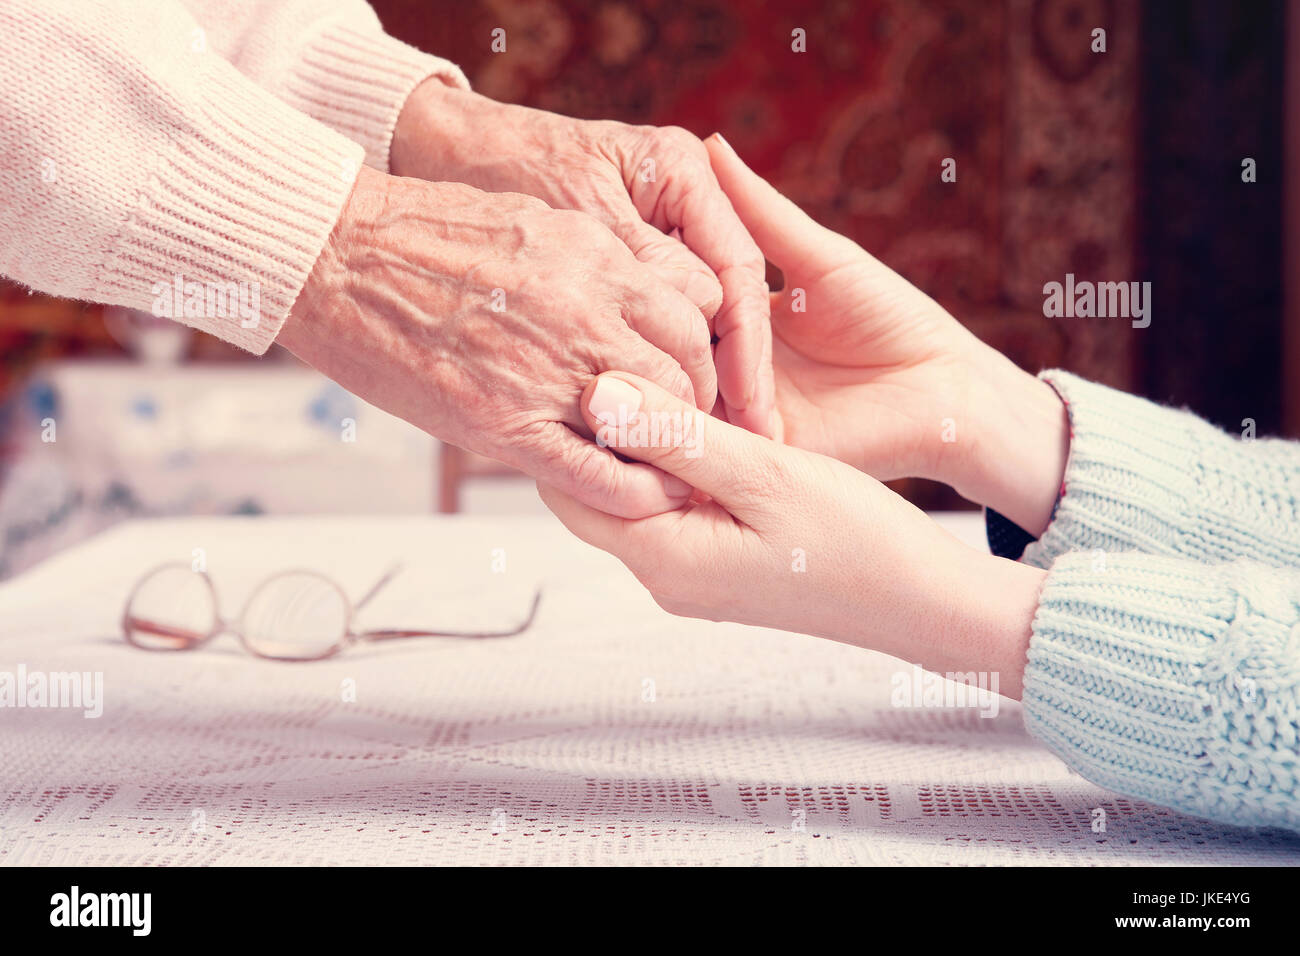 Helping hands, care for the elderly concept Stock Photo